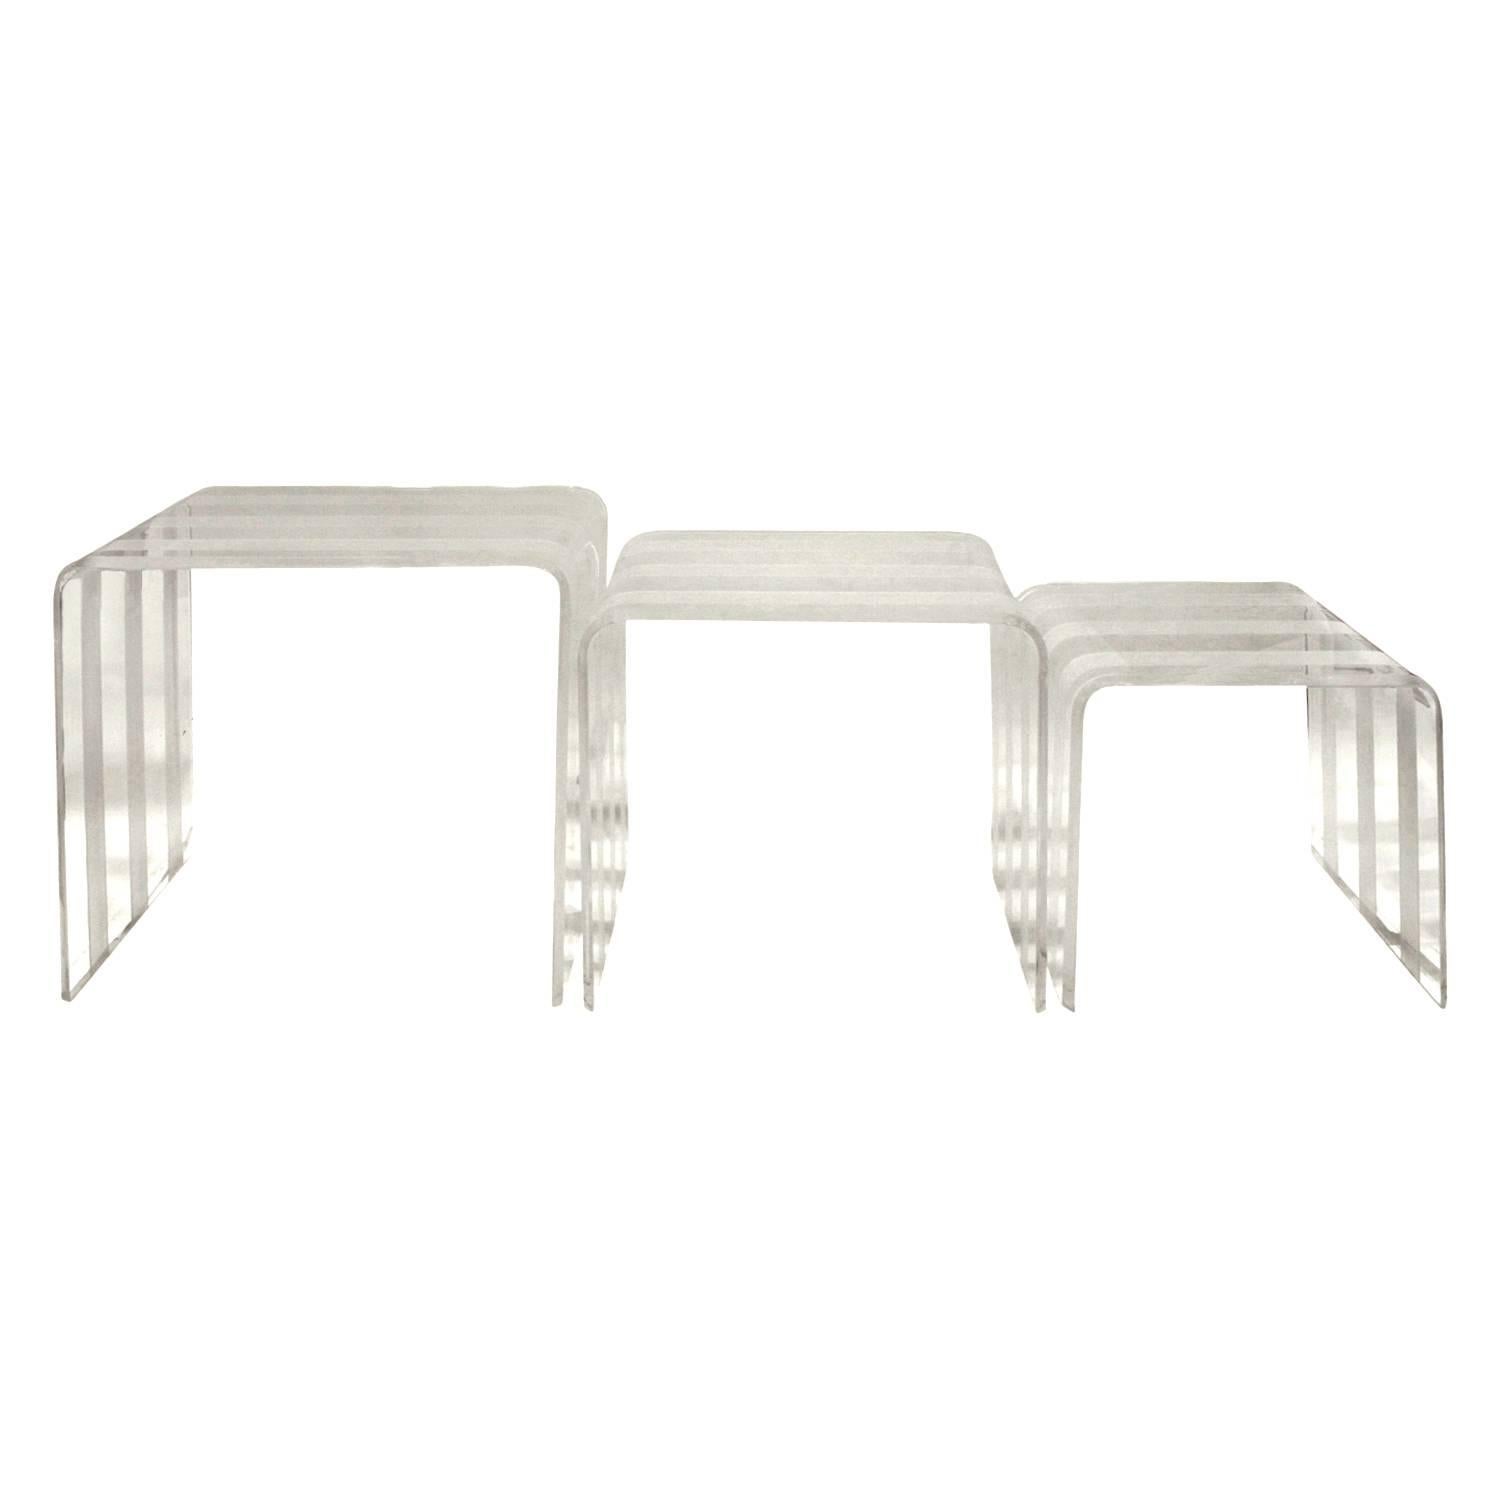 Modern Set of Three Chic Lucite Nesting Tables, 1970s